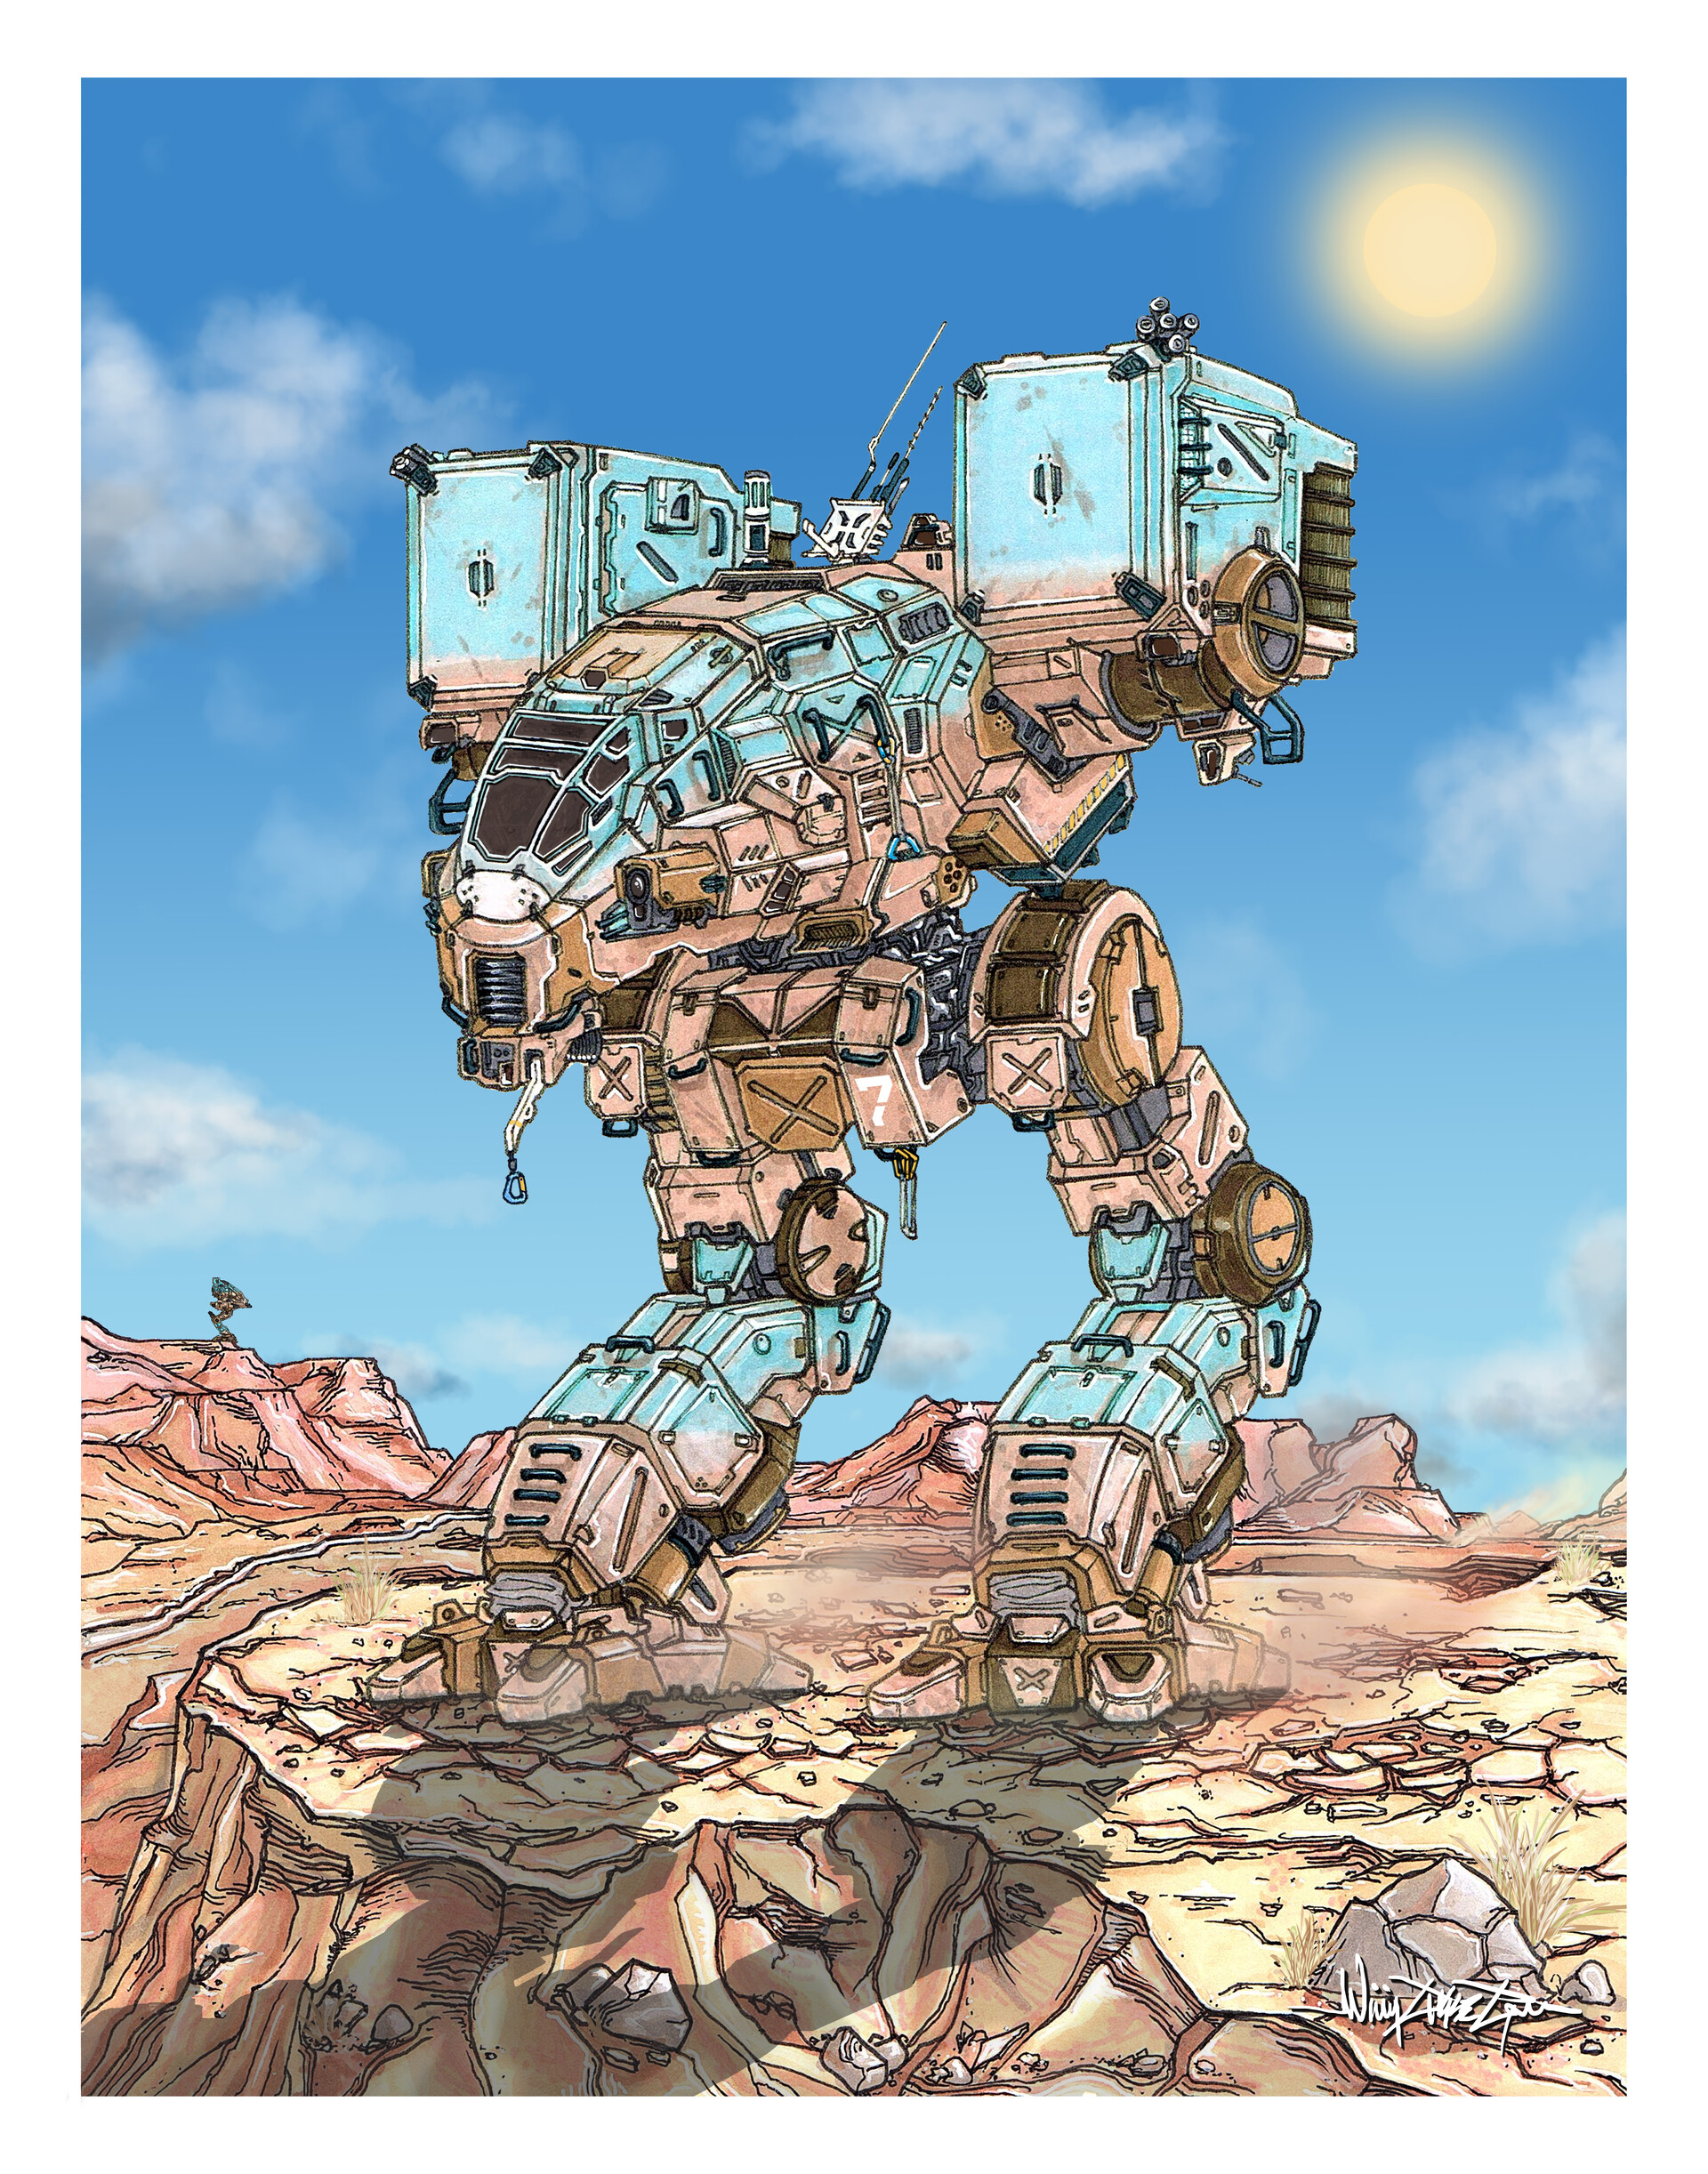 chase-gray-mwo-catapult-final.jpg?1590777815